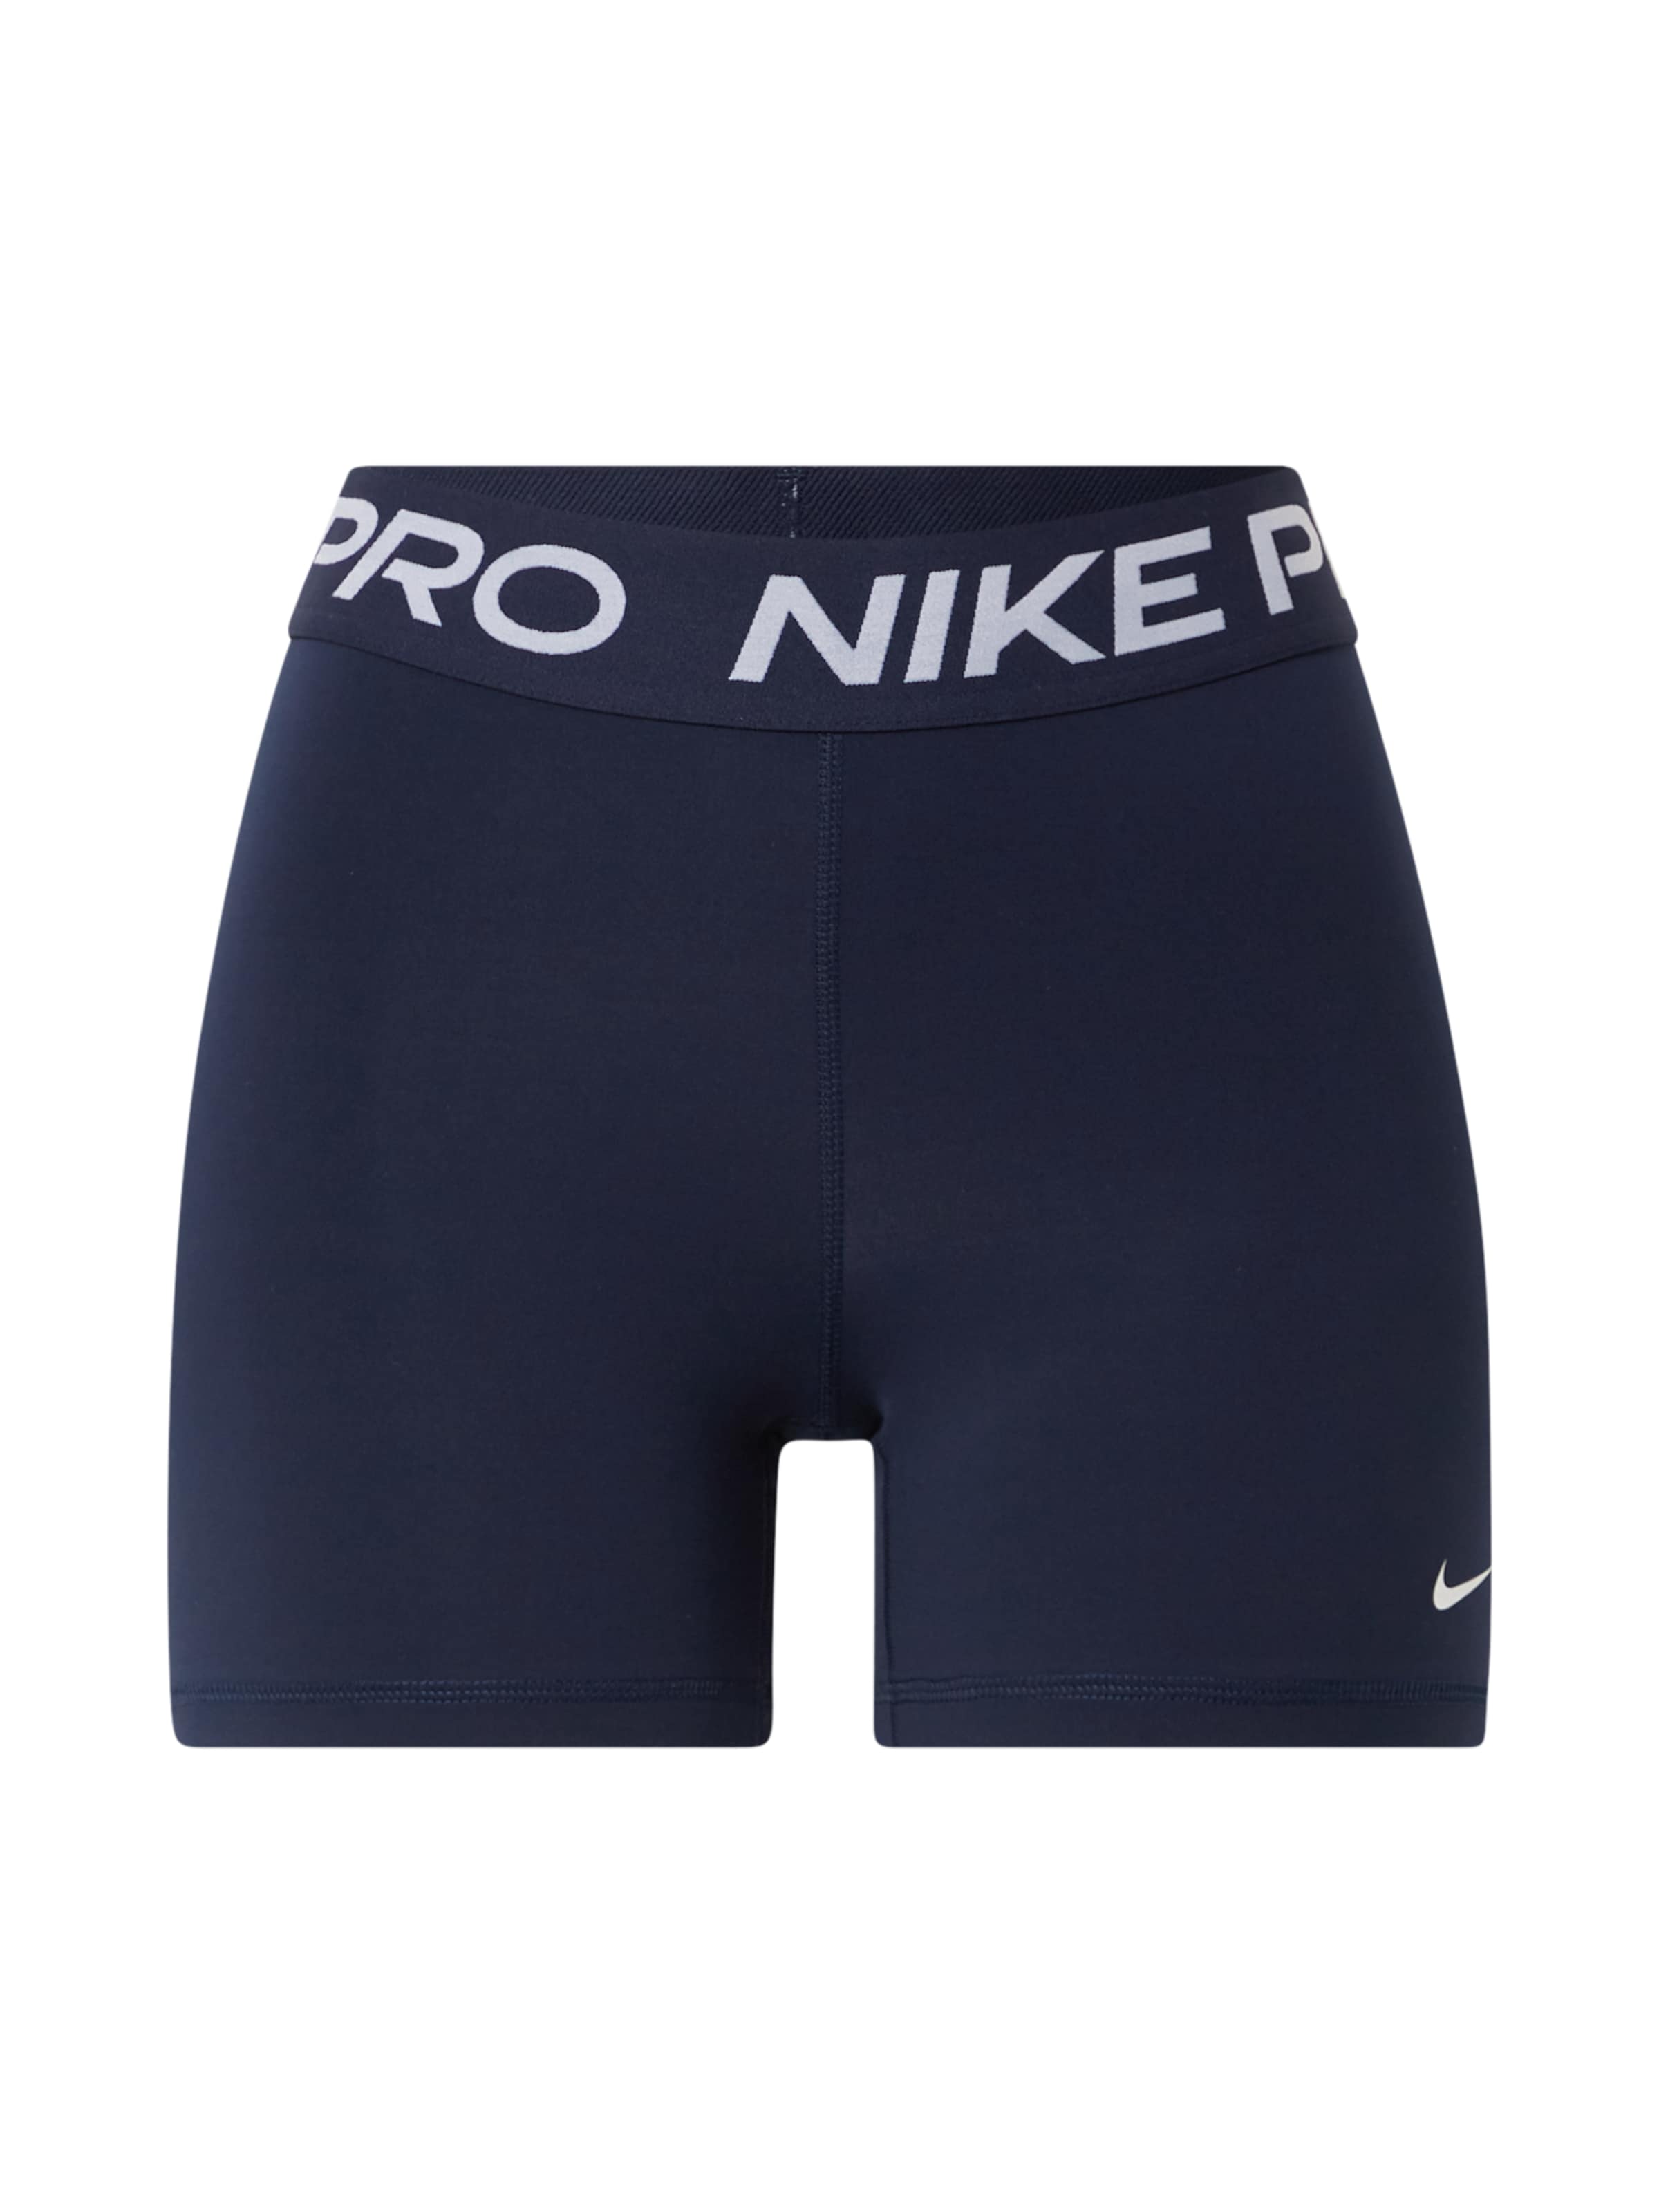 nike pro about you